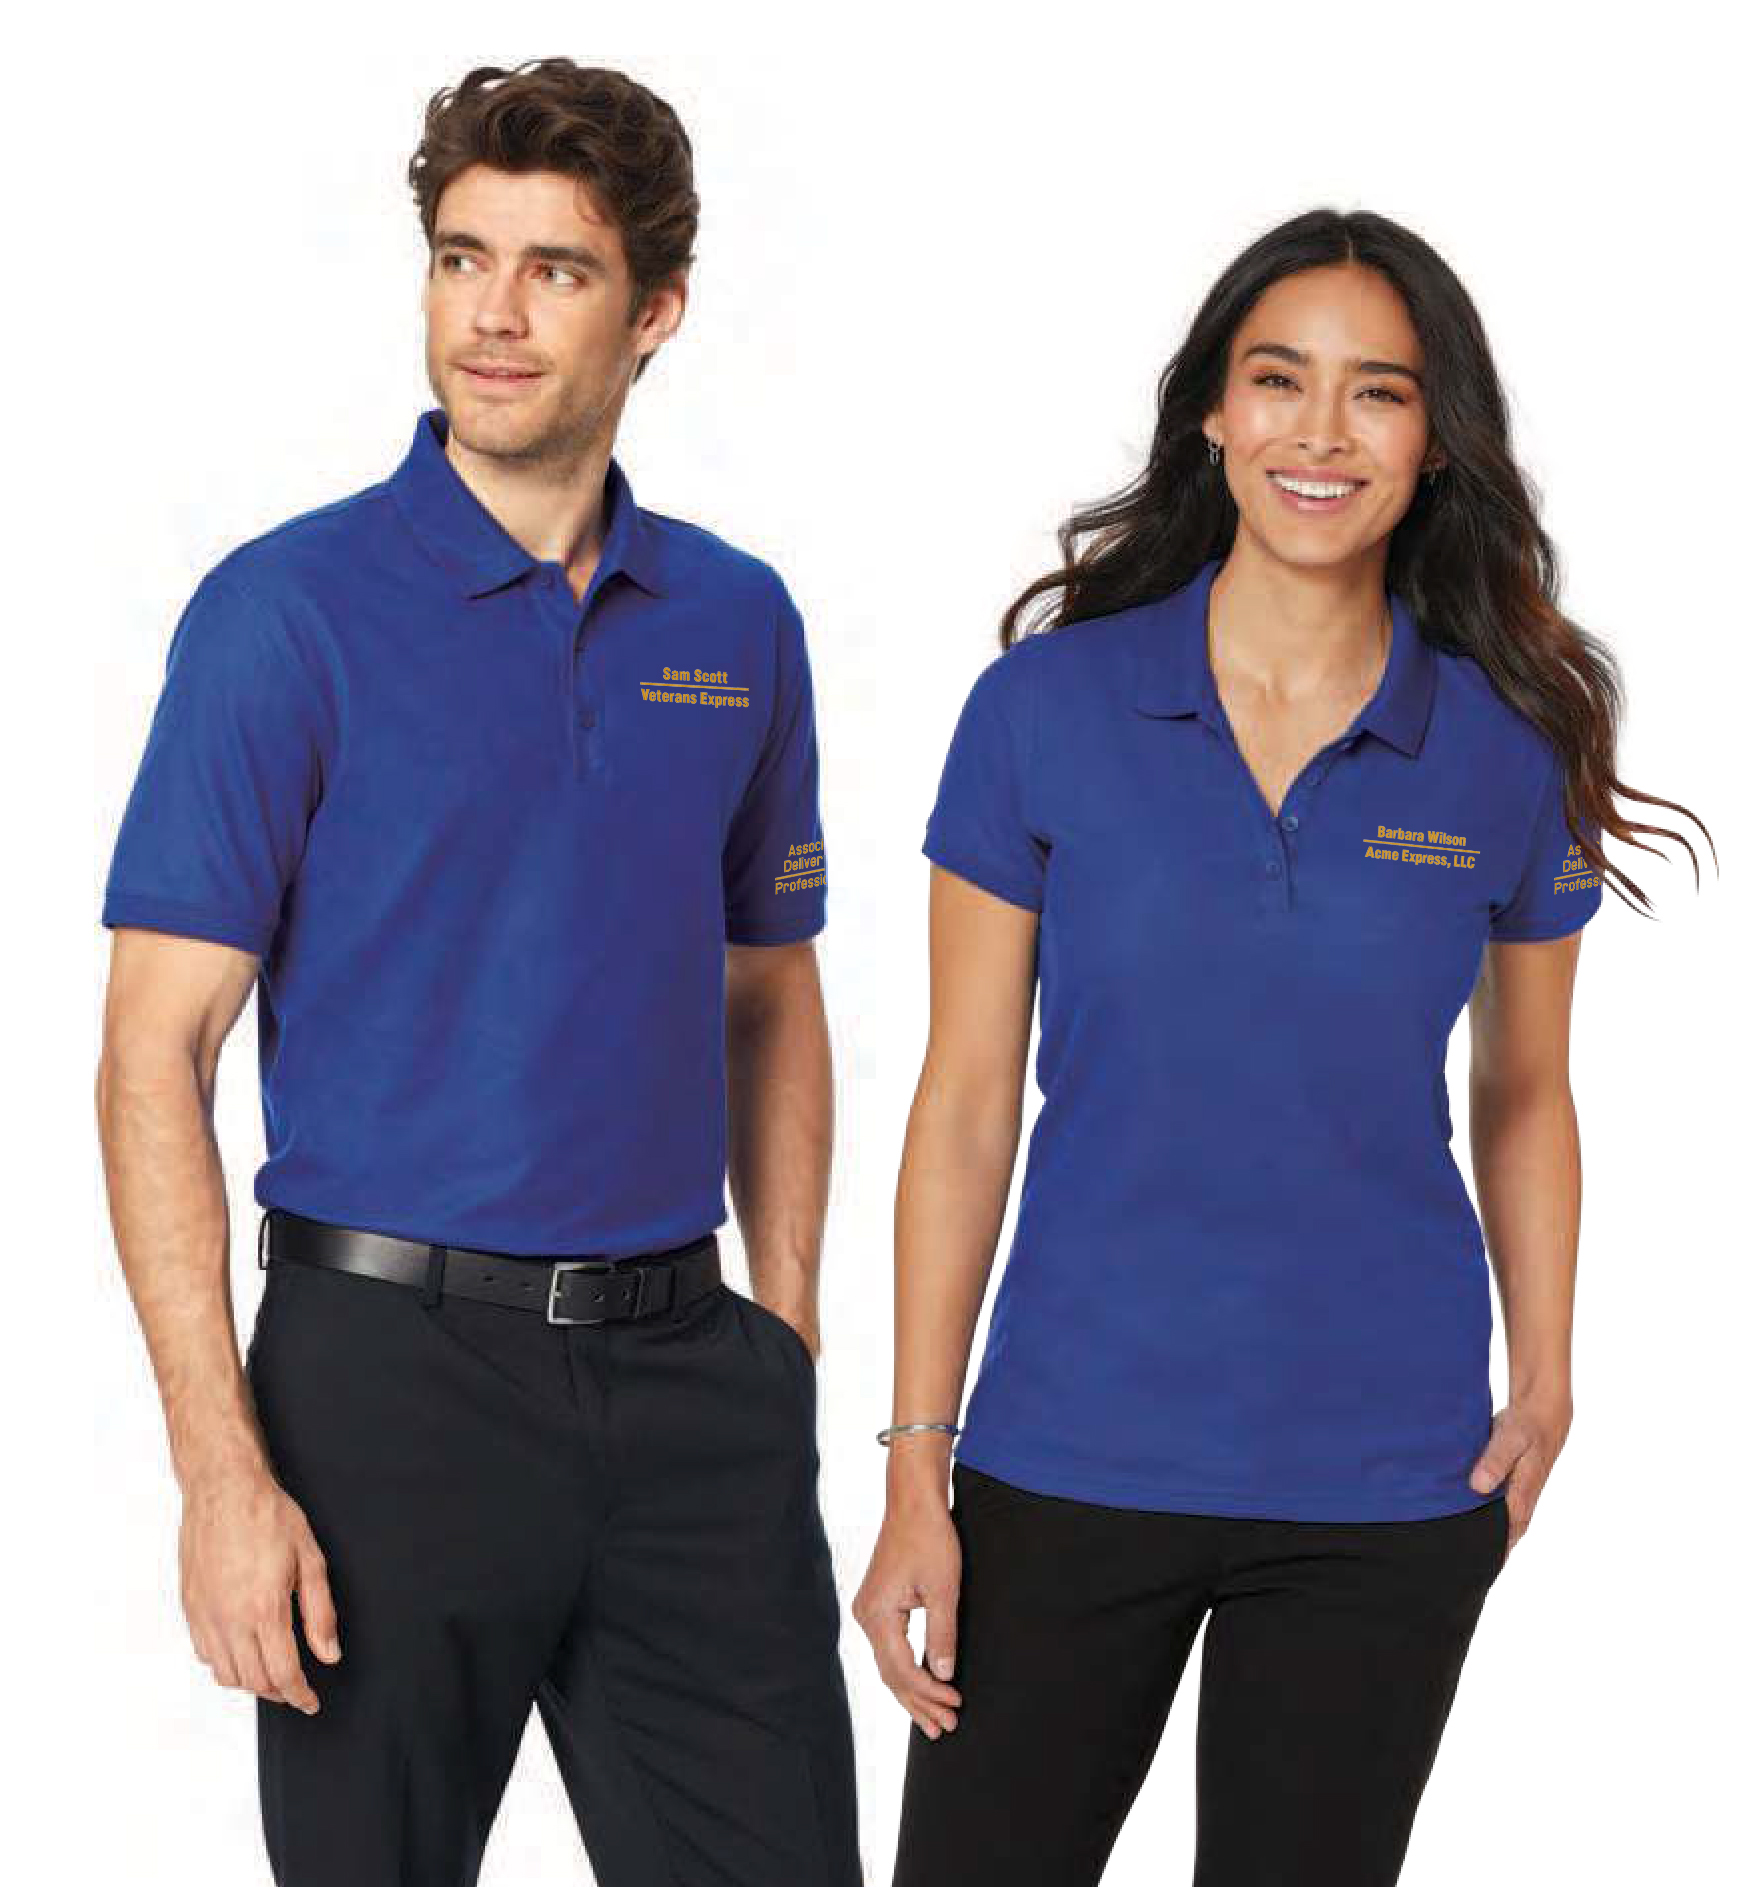 Look professional with delivery driver work clothing from A4DD.